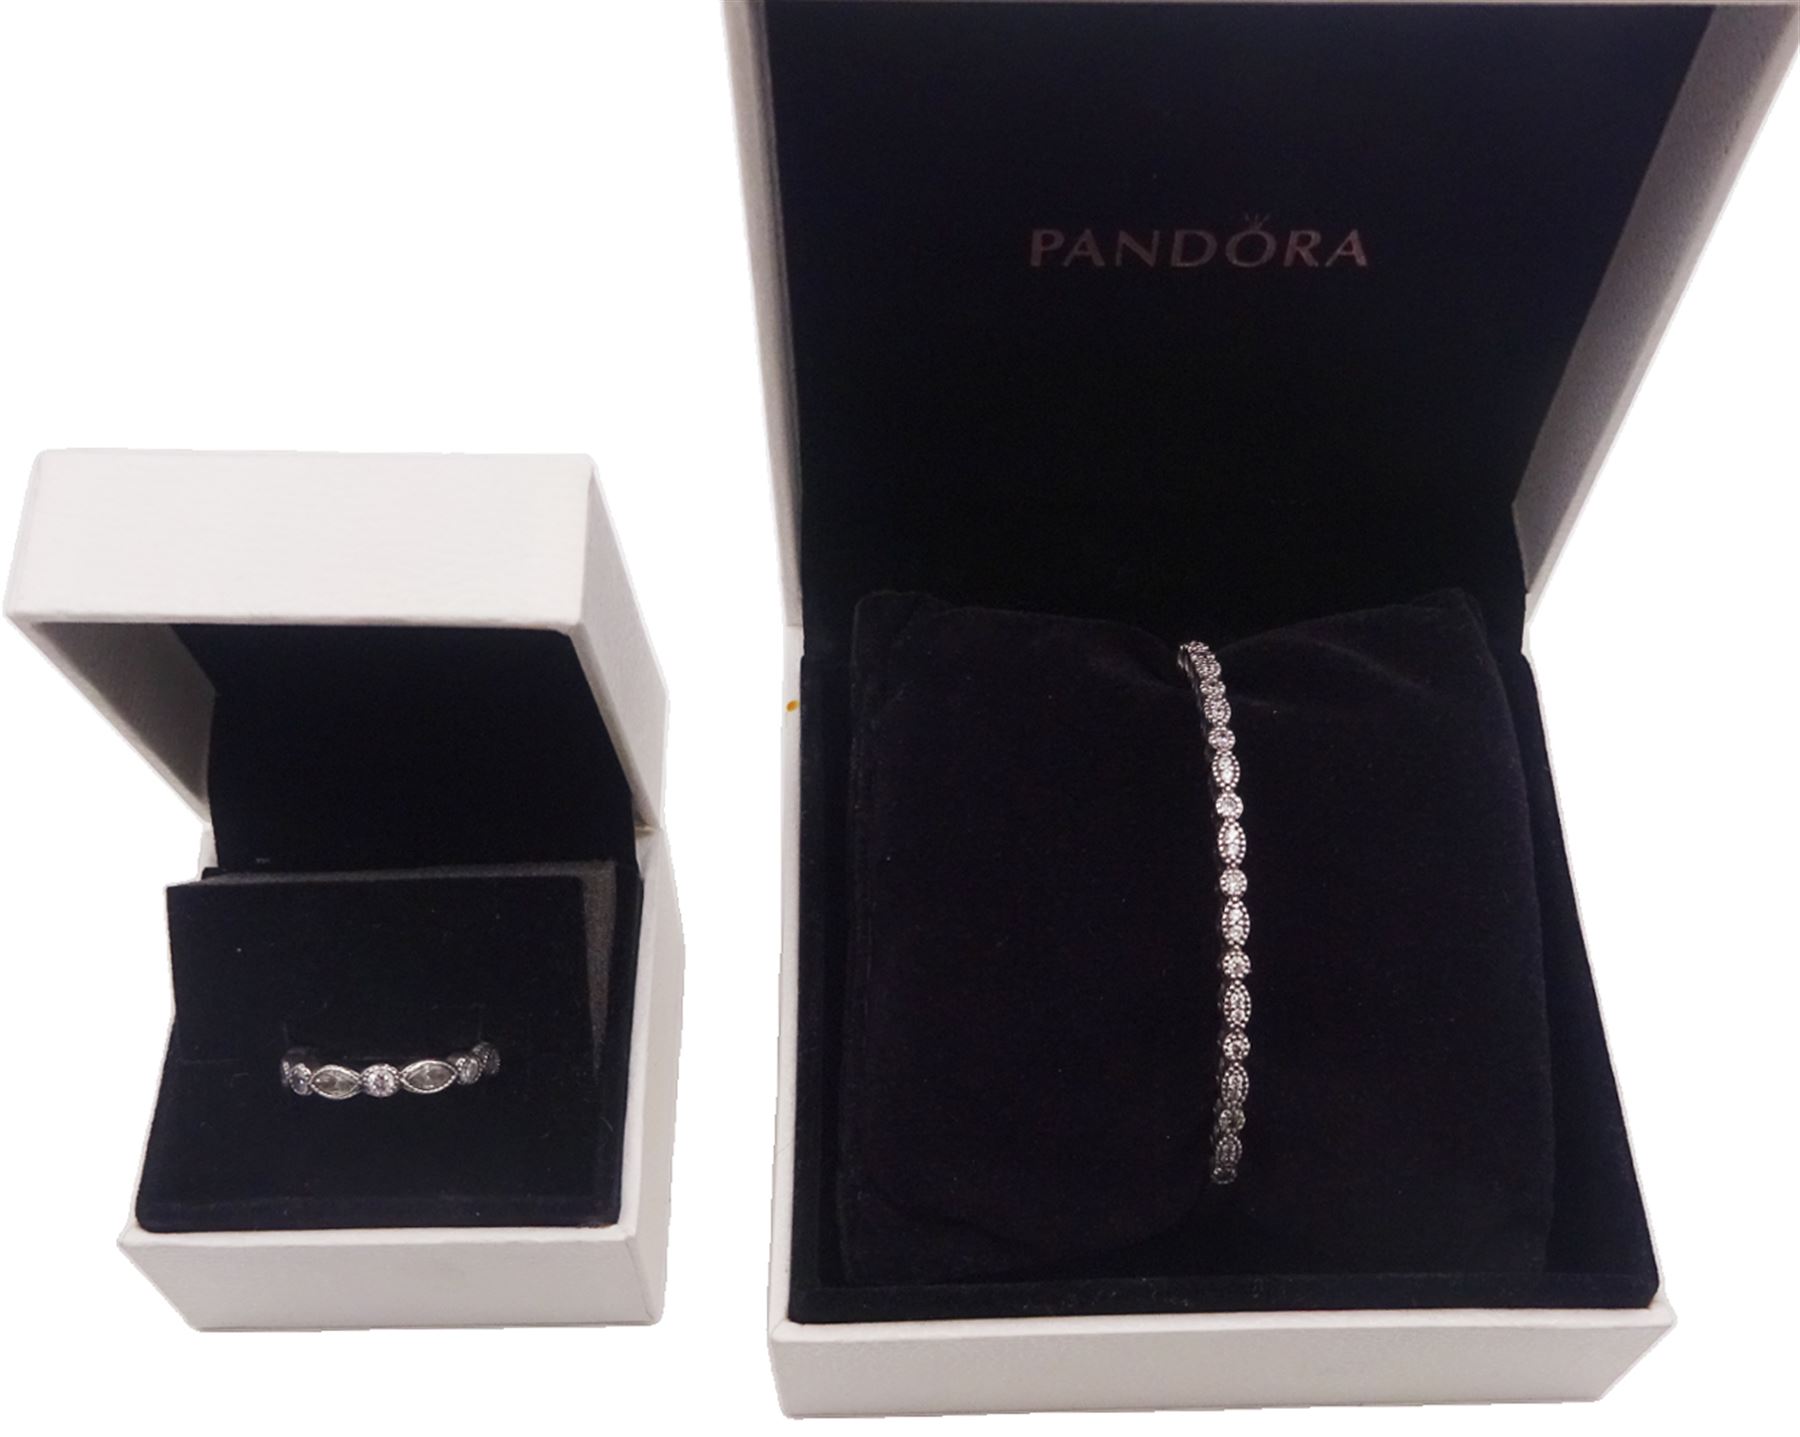 Pandora silver 'Alluring Brilliant Marquise' cubic zirconia bangle and similar ring - Image 2 of 3